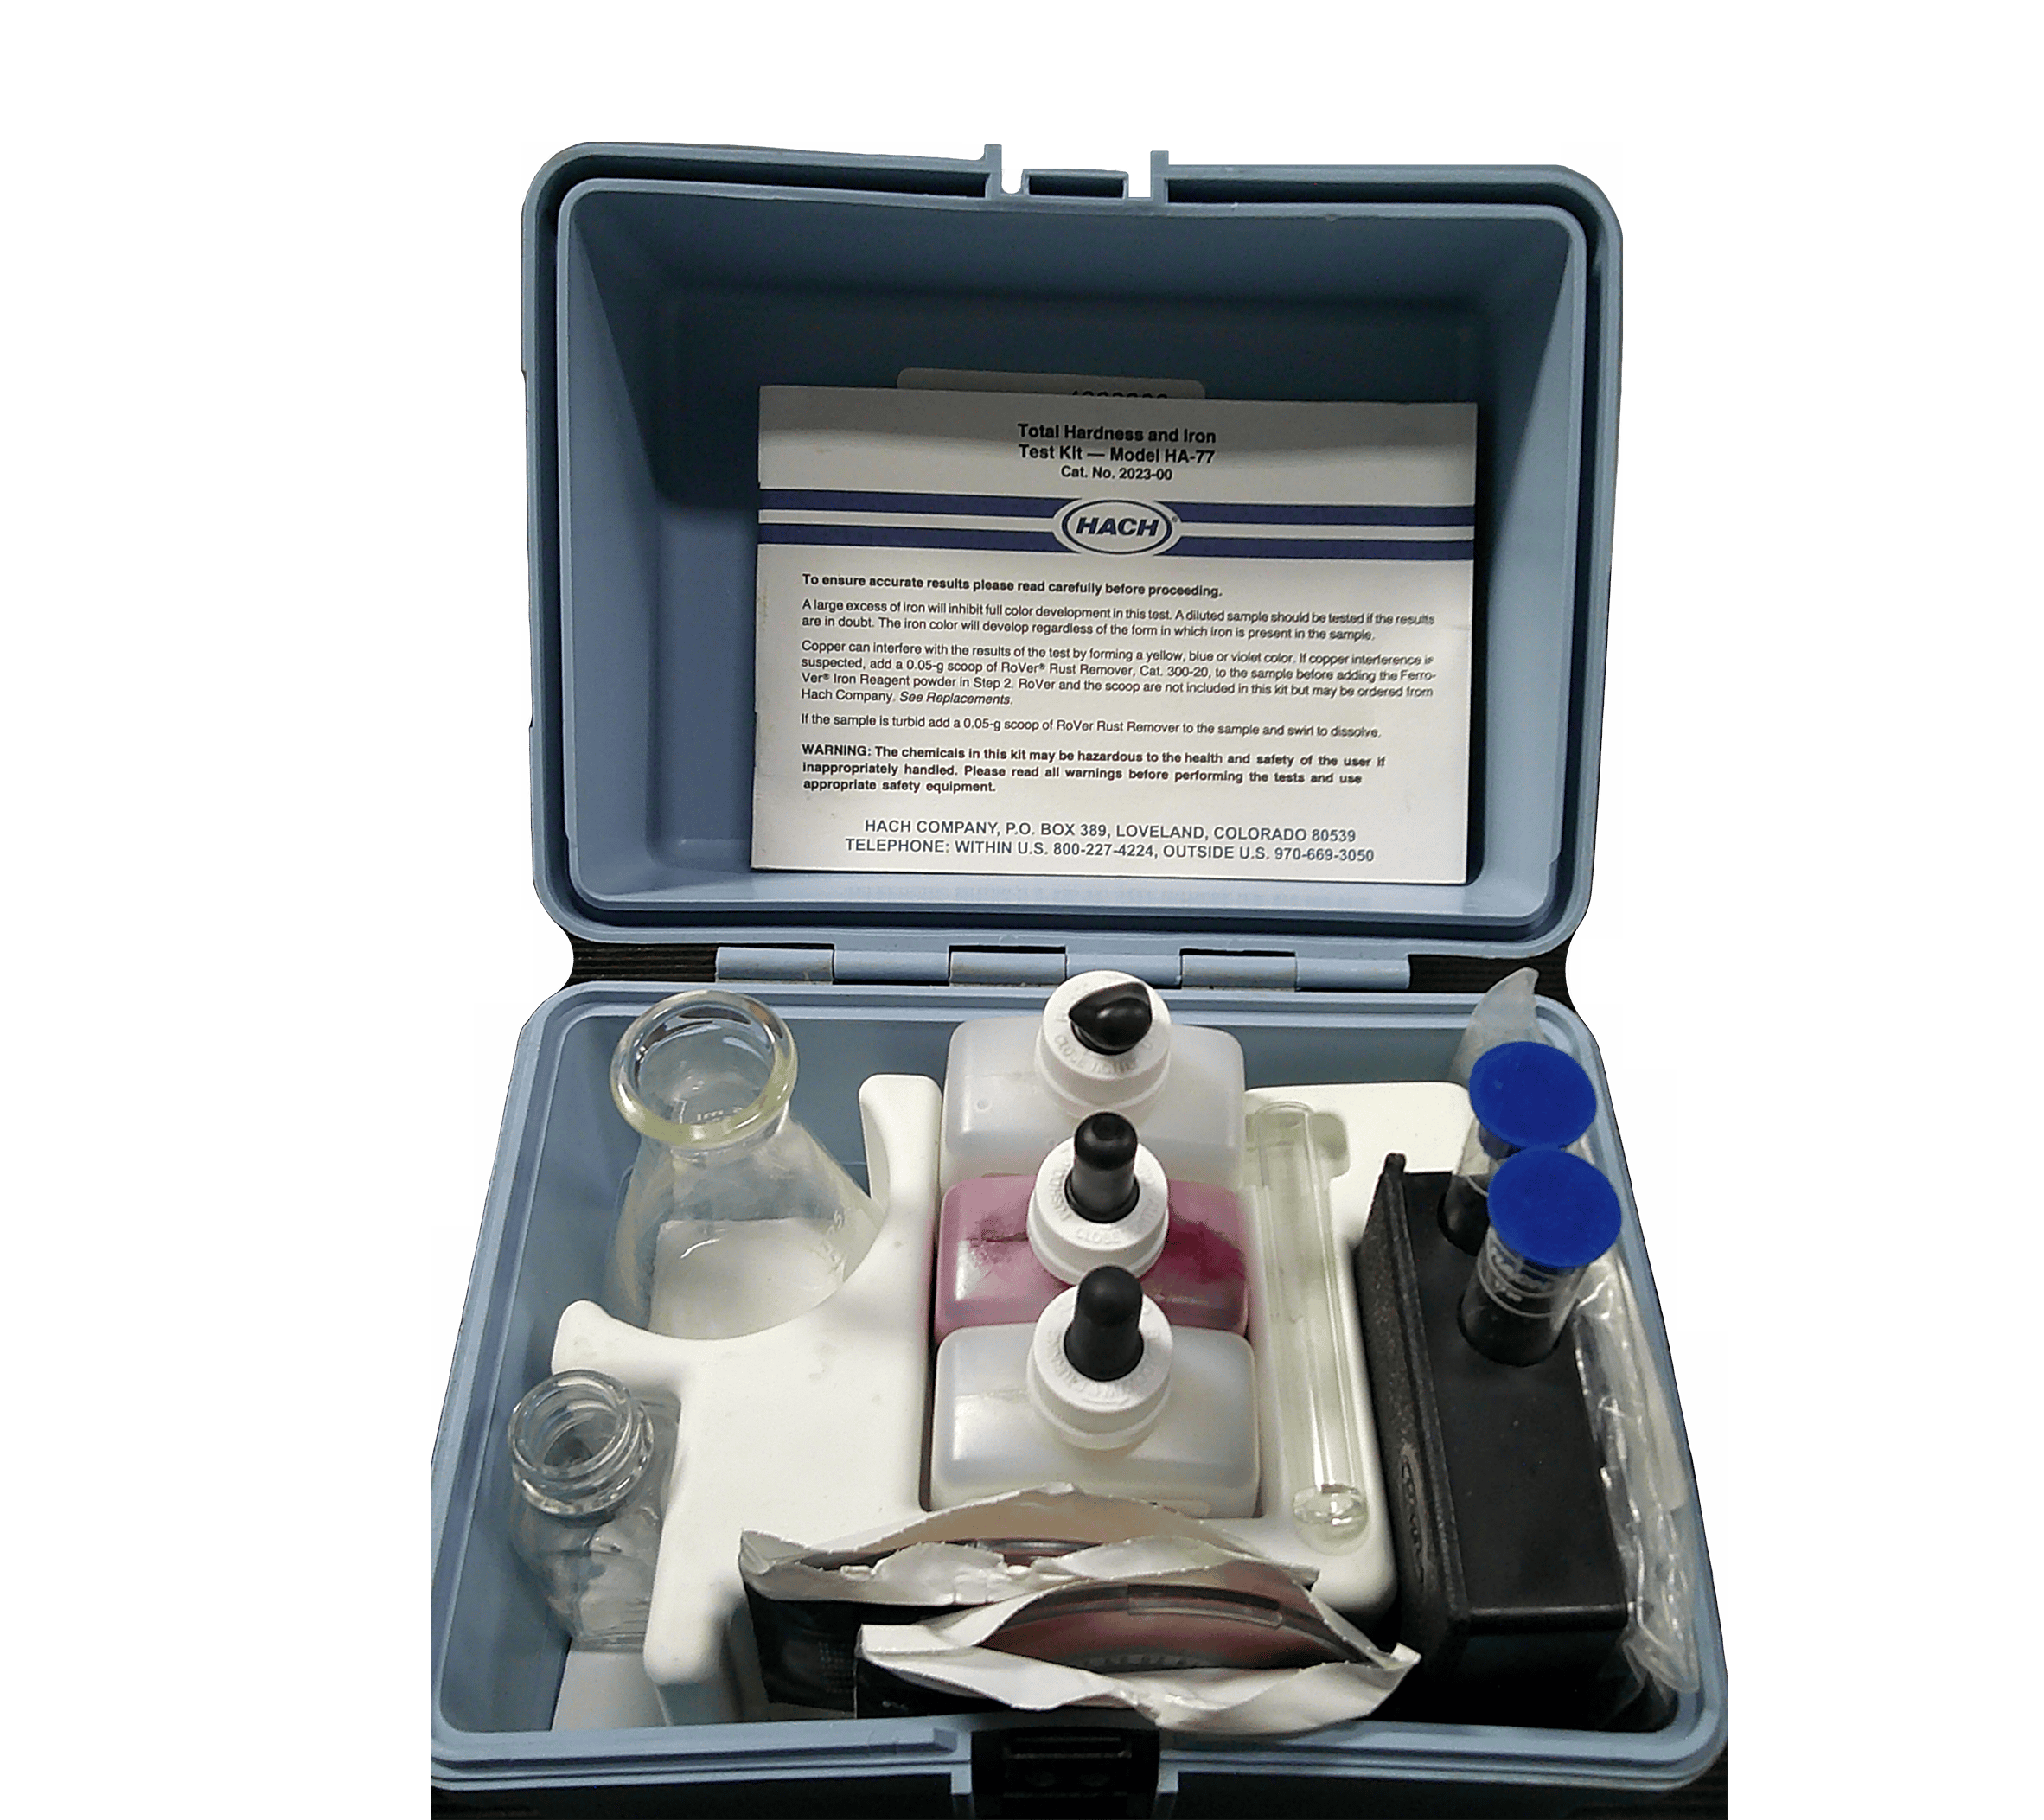 Hach Total Hardness And Iron Test Kit Americhem 4804